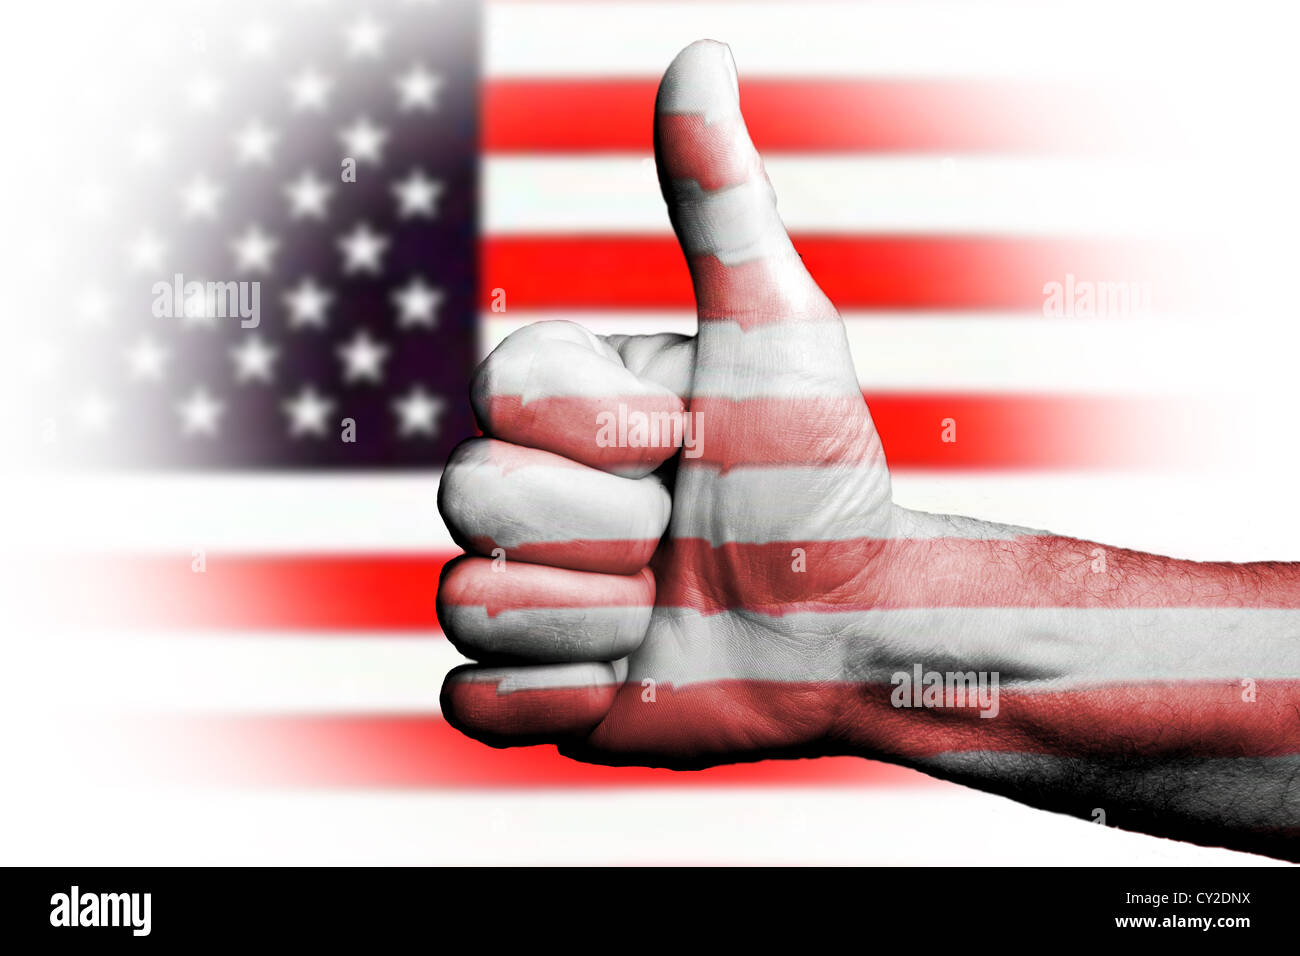 Thumbs up for to America USA Americans, sporting metaphor we are going to win prevail,vote of confidence for country and people. Stock Photo